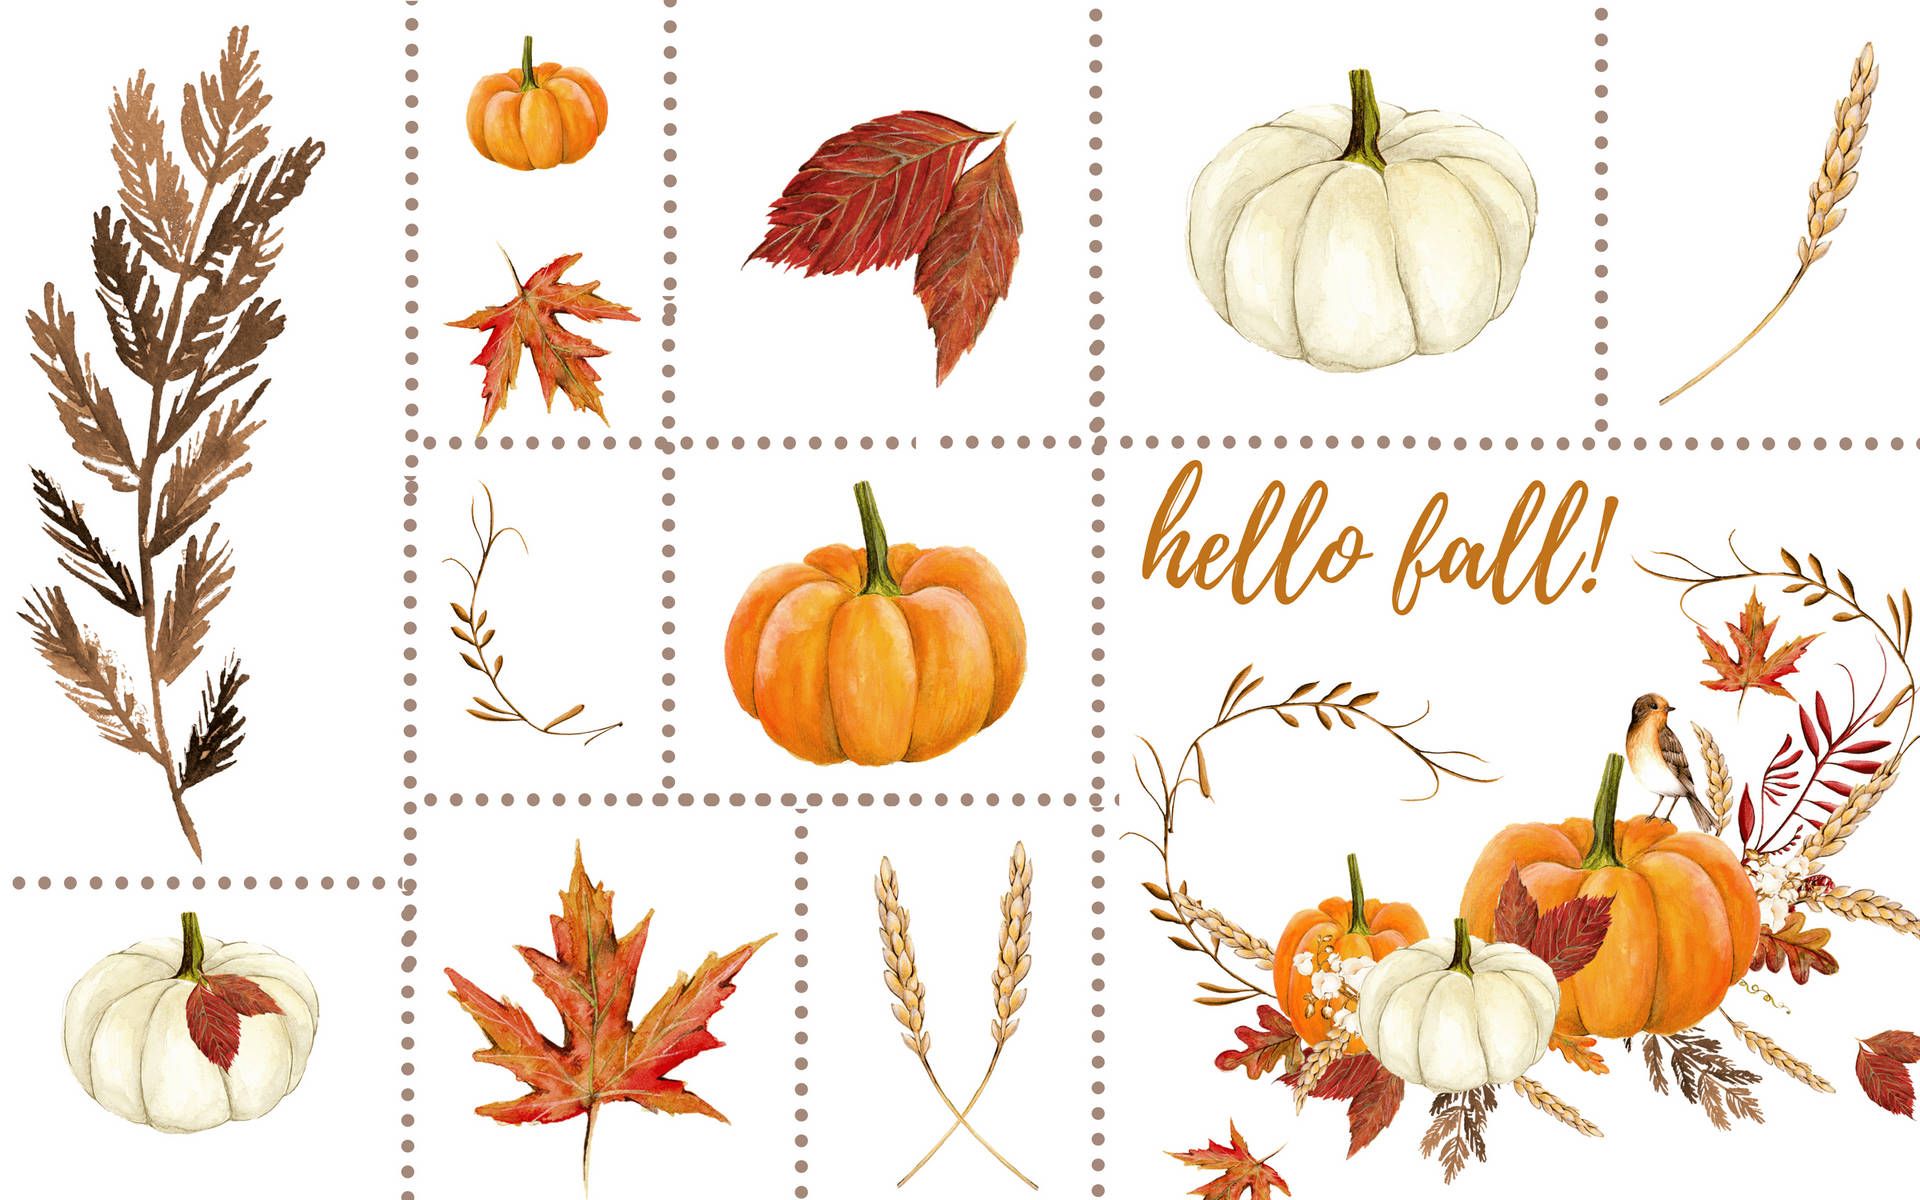 A collection of fall elements including pumpkins, leaves, wheat, and branches. - Cute fall